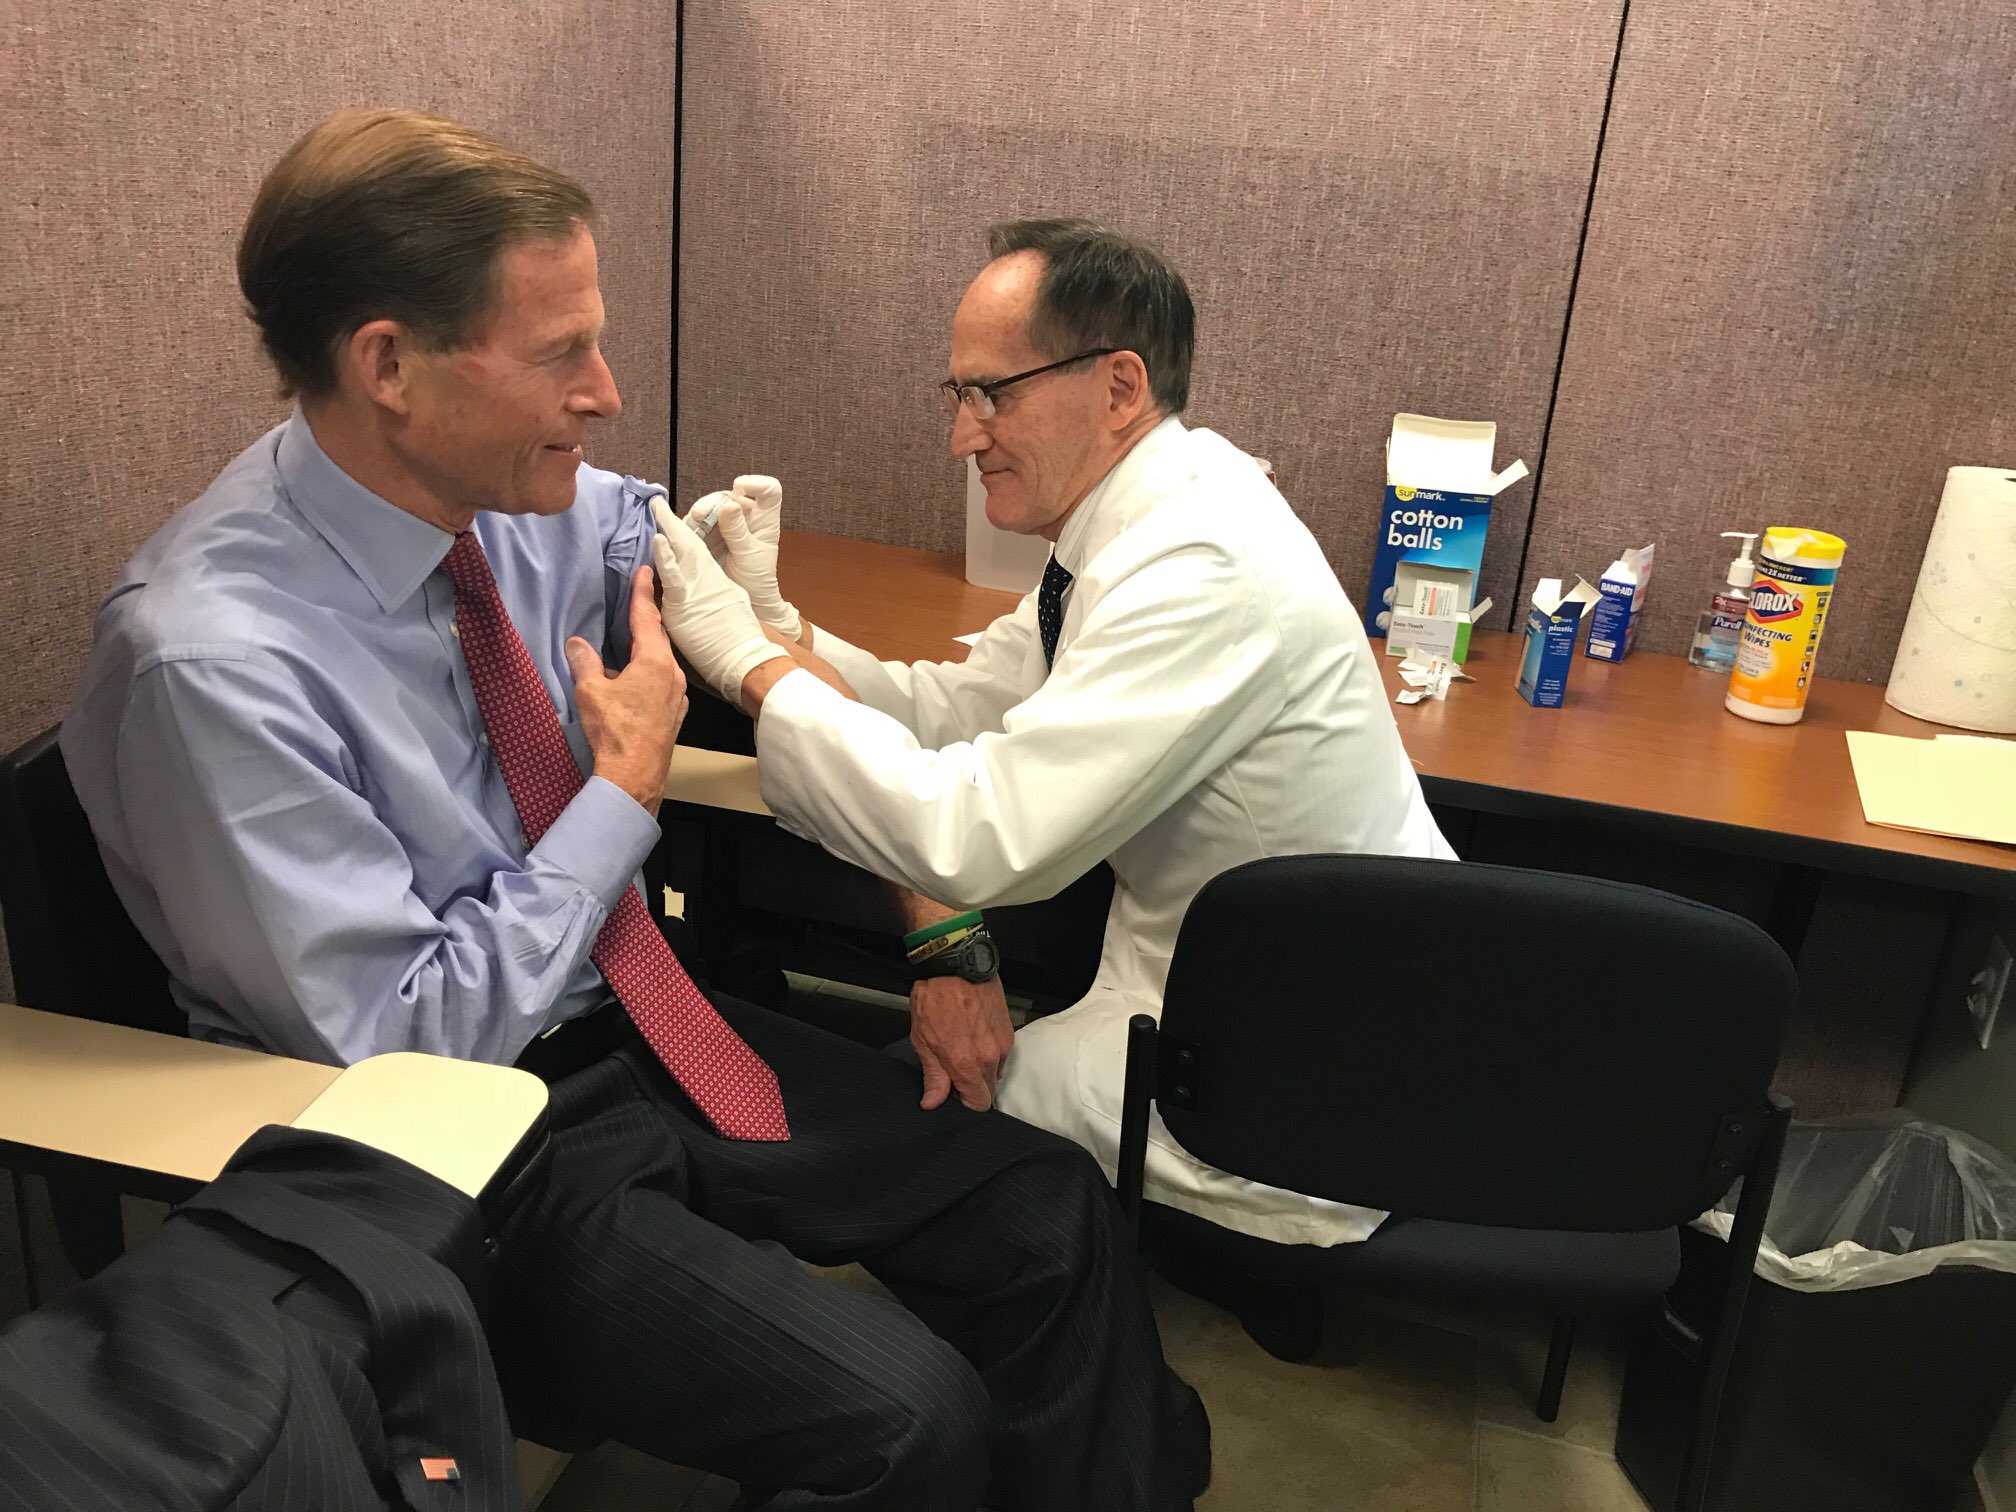 Richard Blumenthal on Twitter: "Over 80,000 people died nationwide from the flu last year. A flu ...